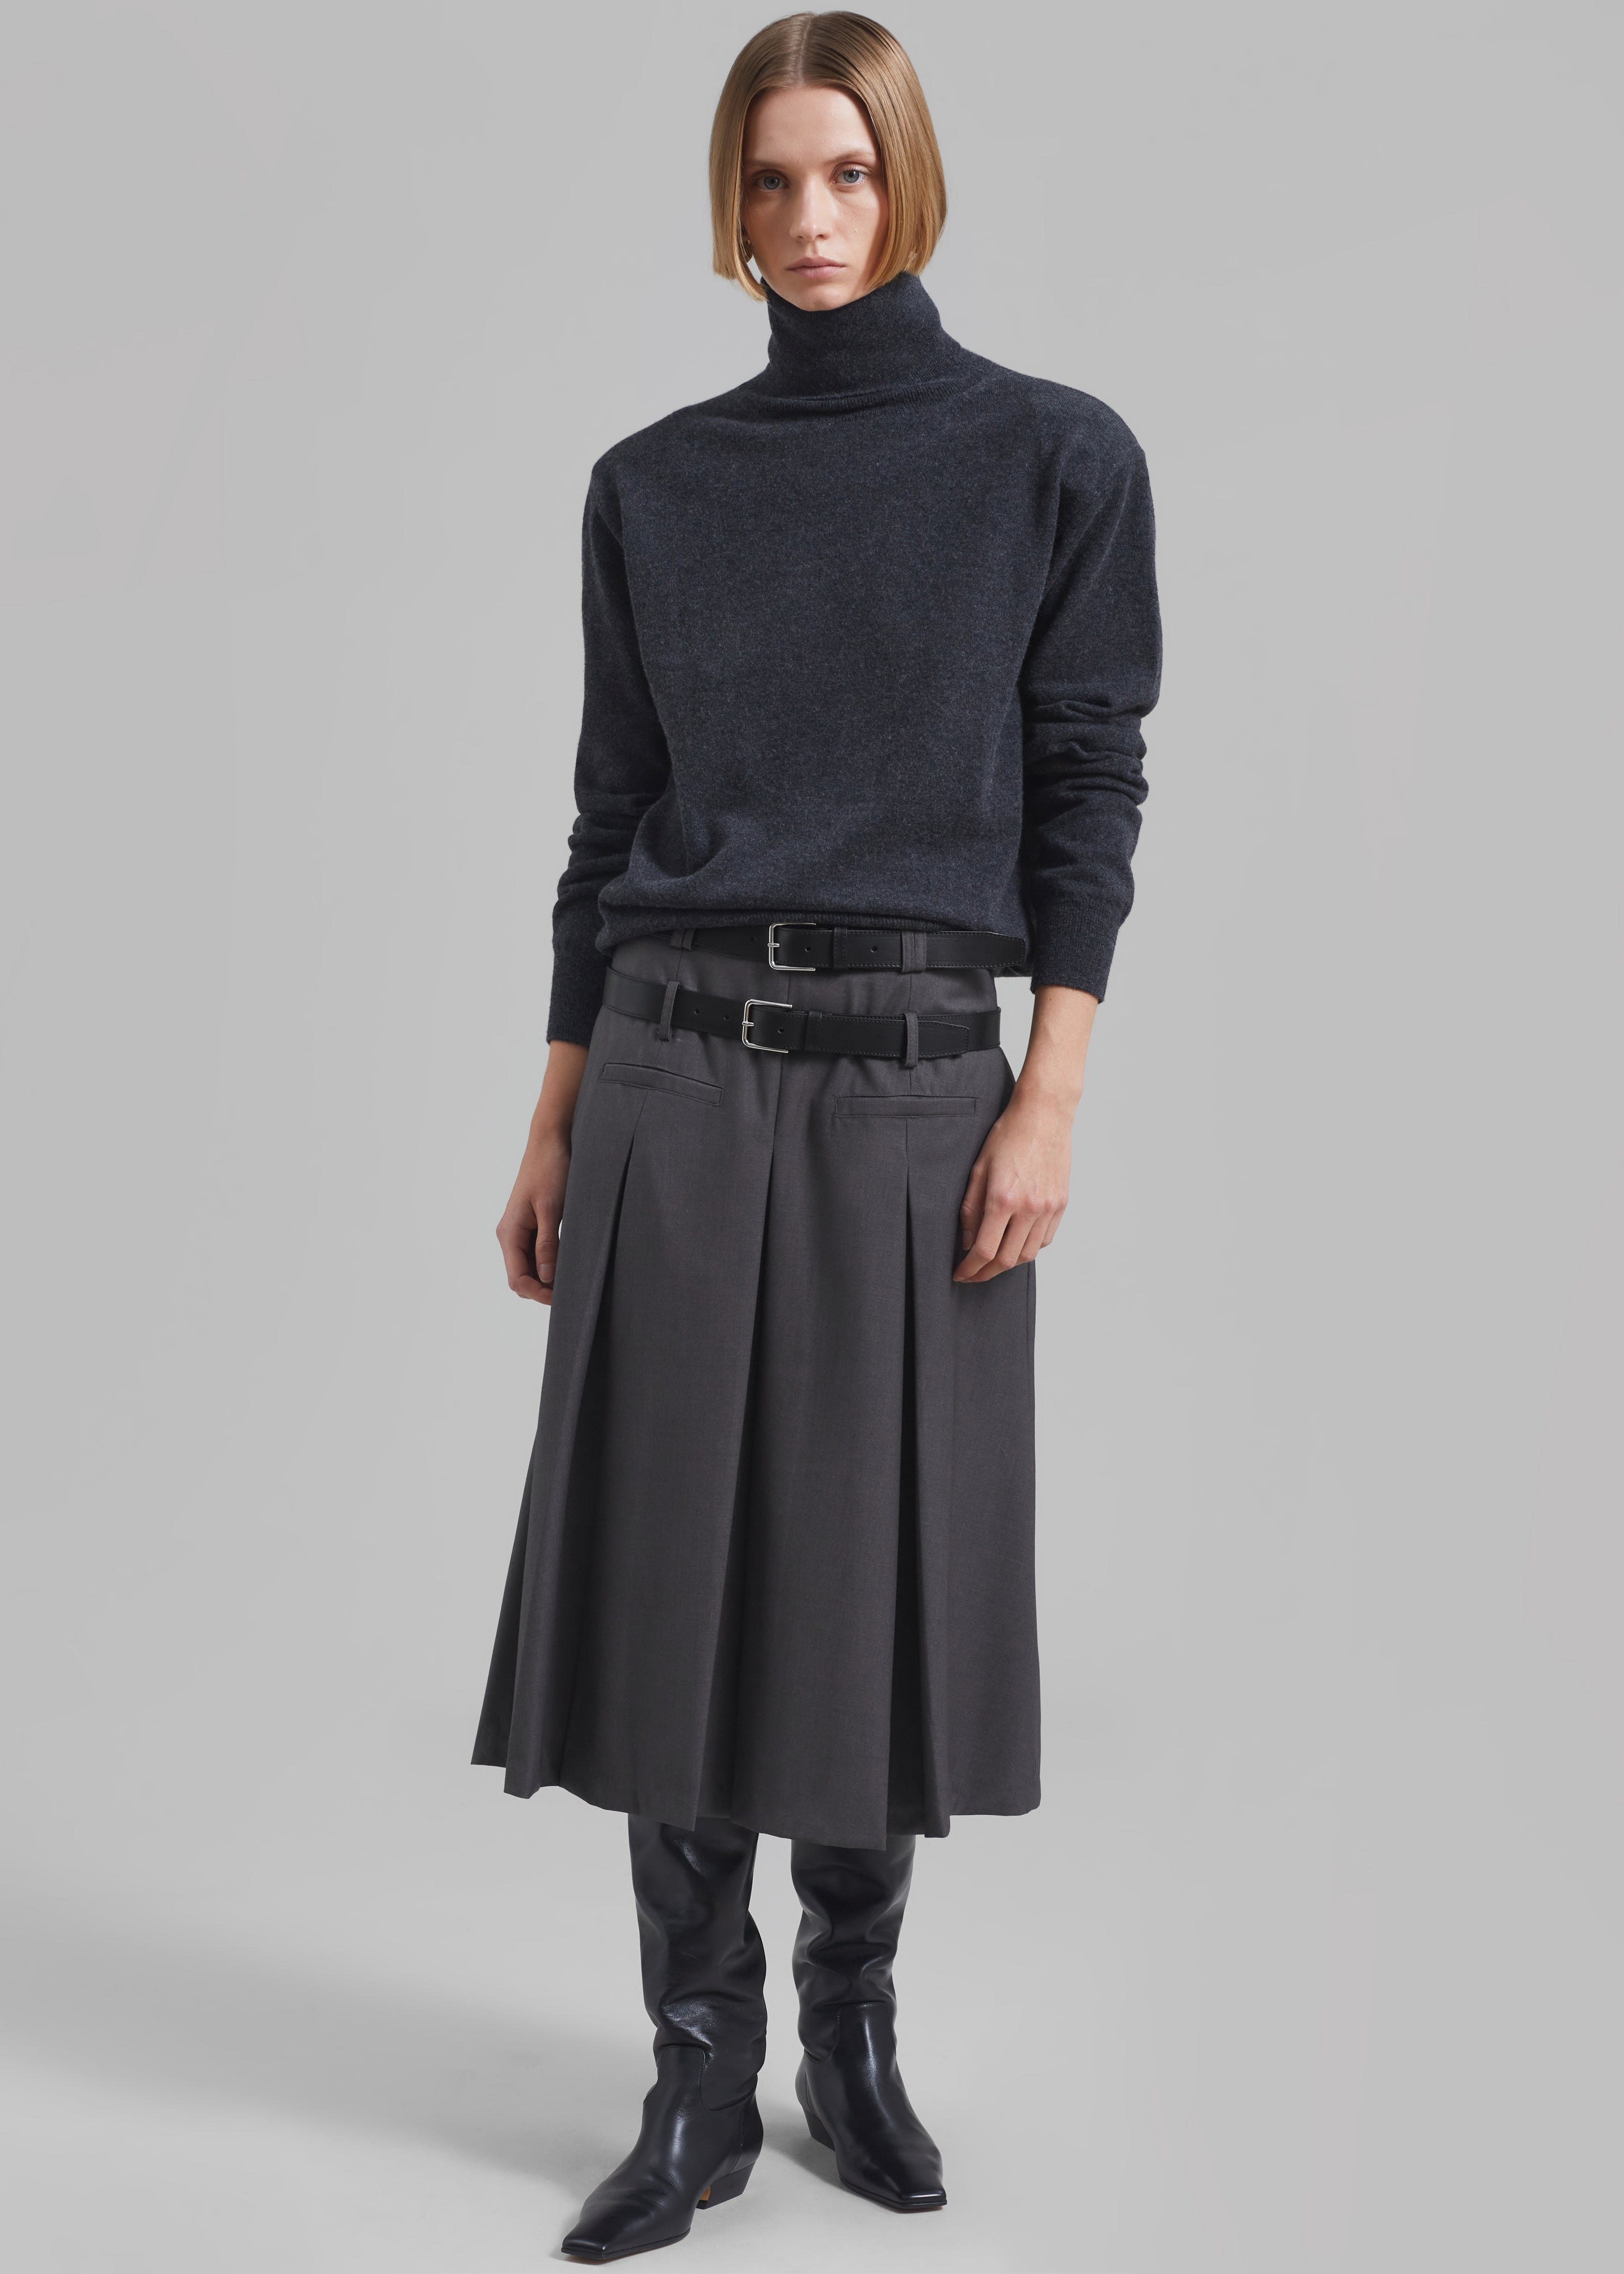 Ines Thin Padded Turtleneck - Charcoal - 3